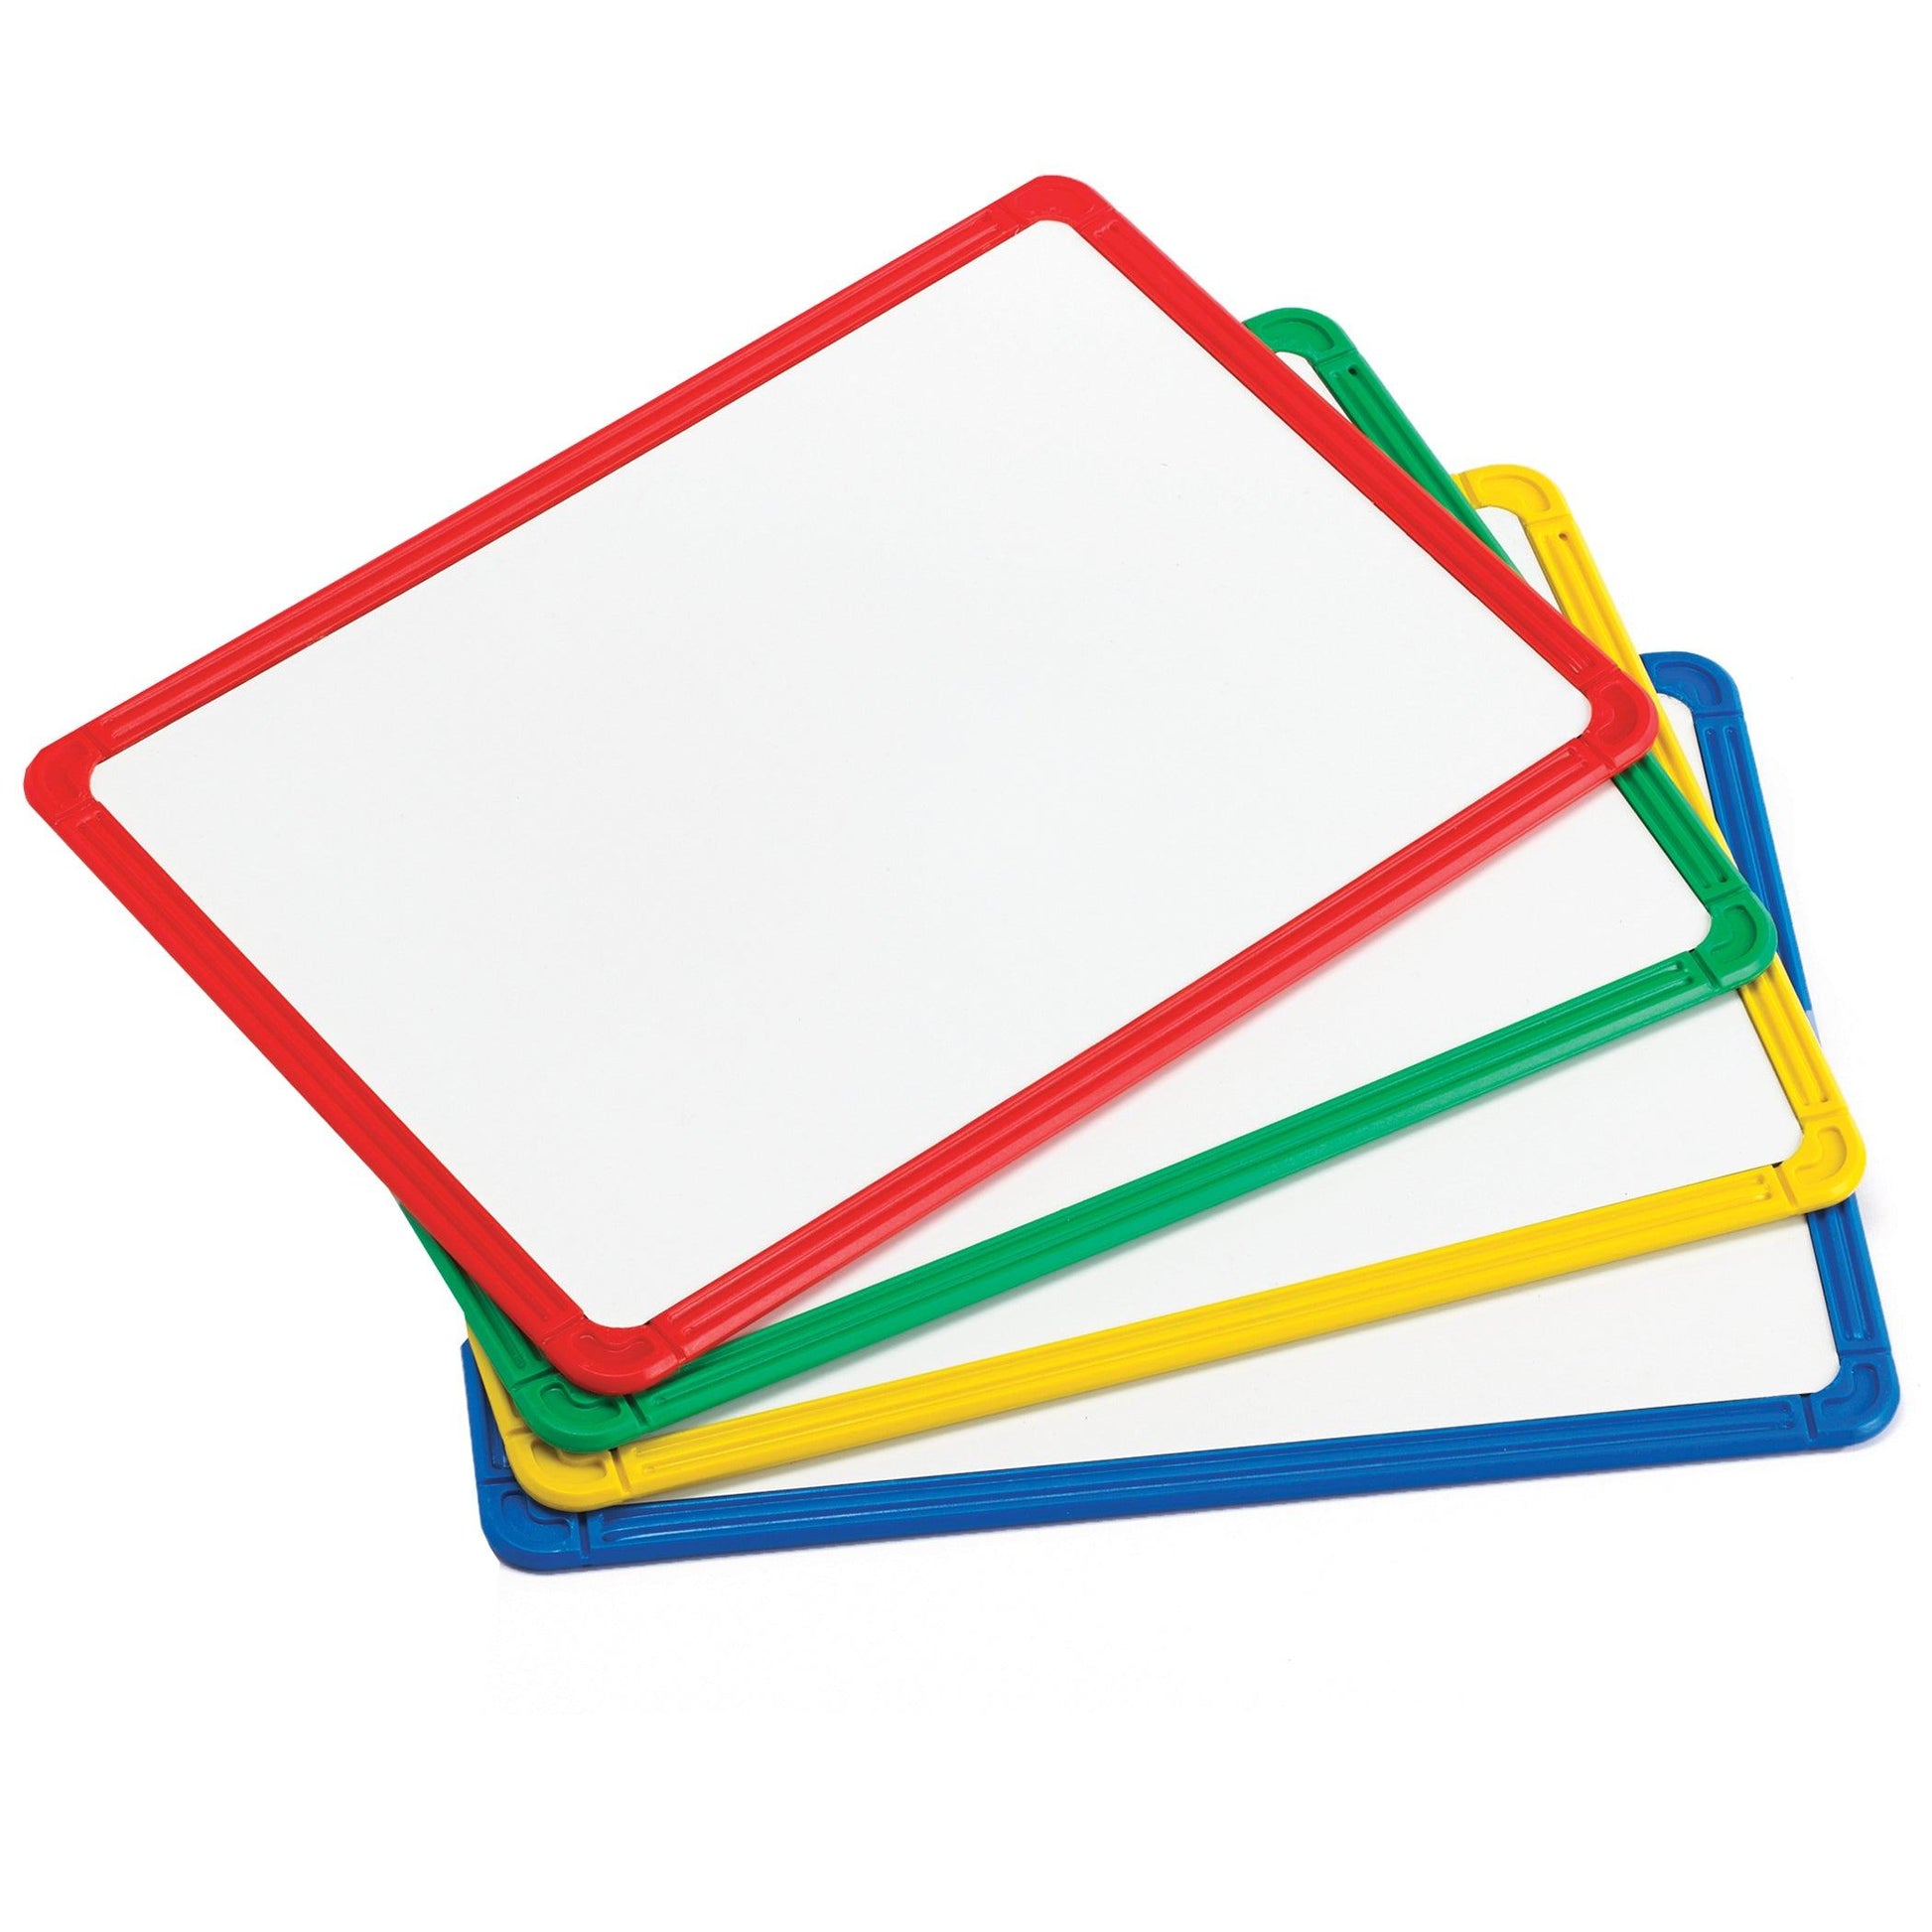 Plastic Framed Metal Whiteboards - Four Colors - Set of 4 - Loomini